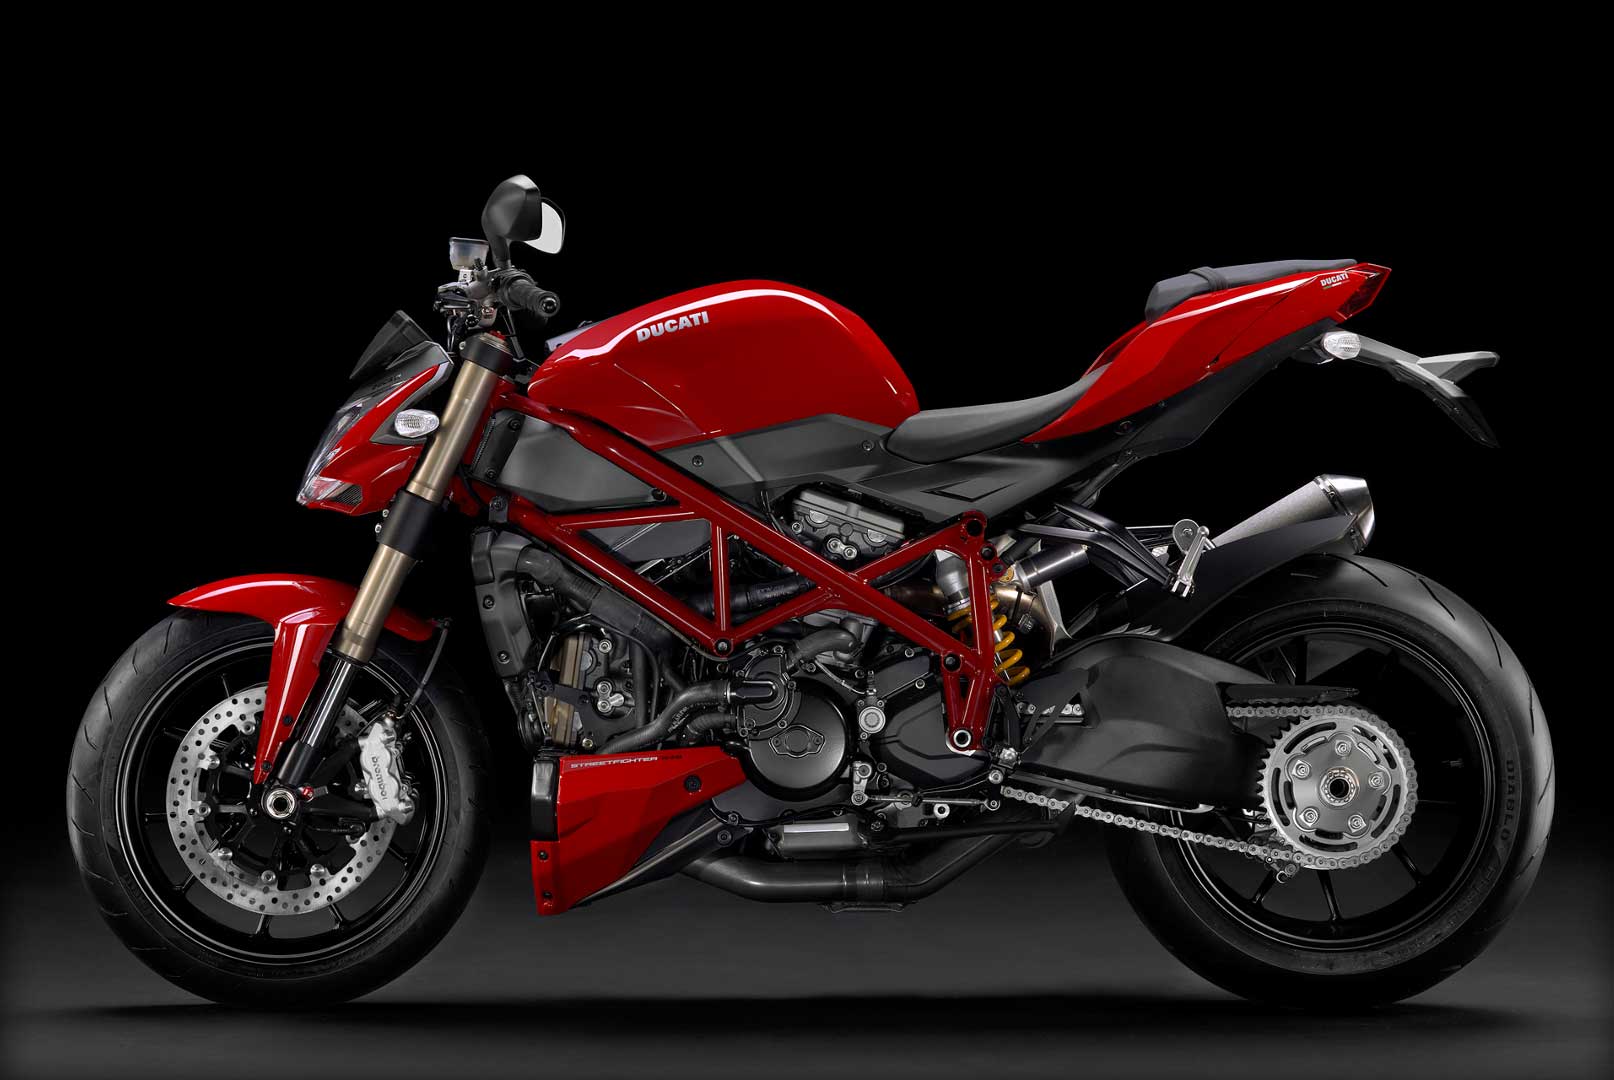 Ducati Streetfighter S side view